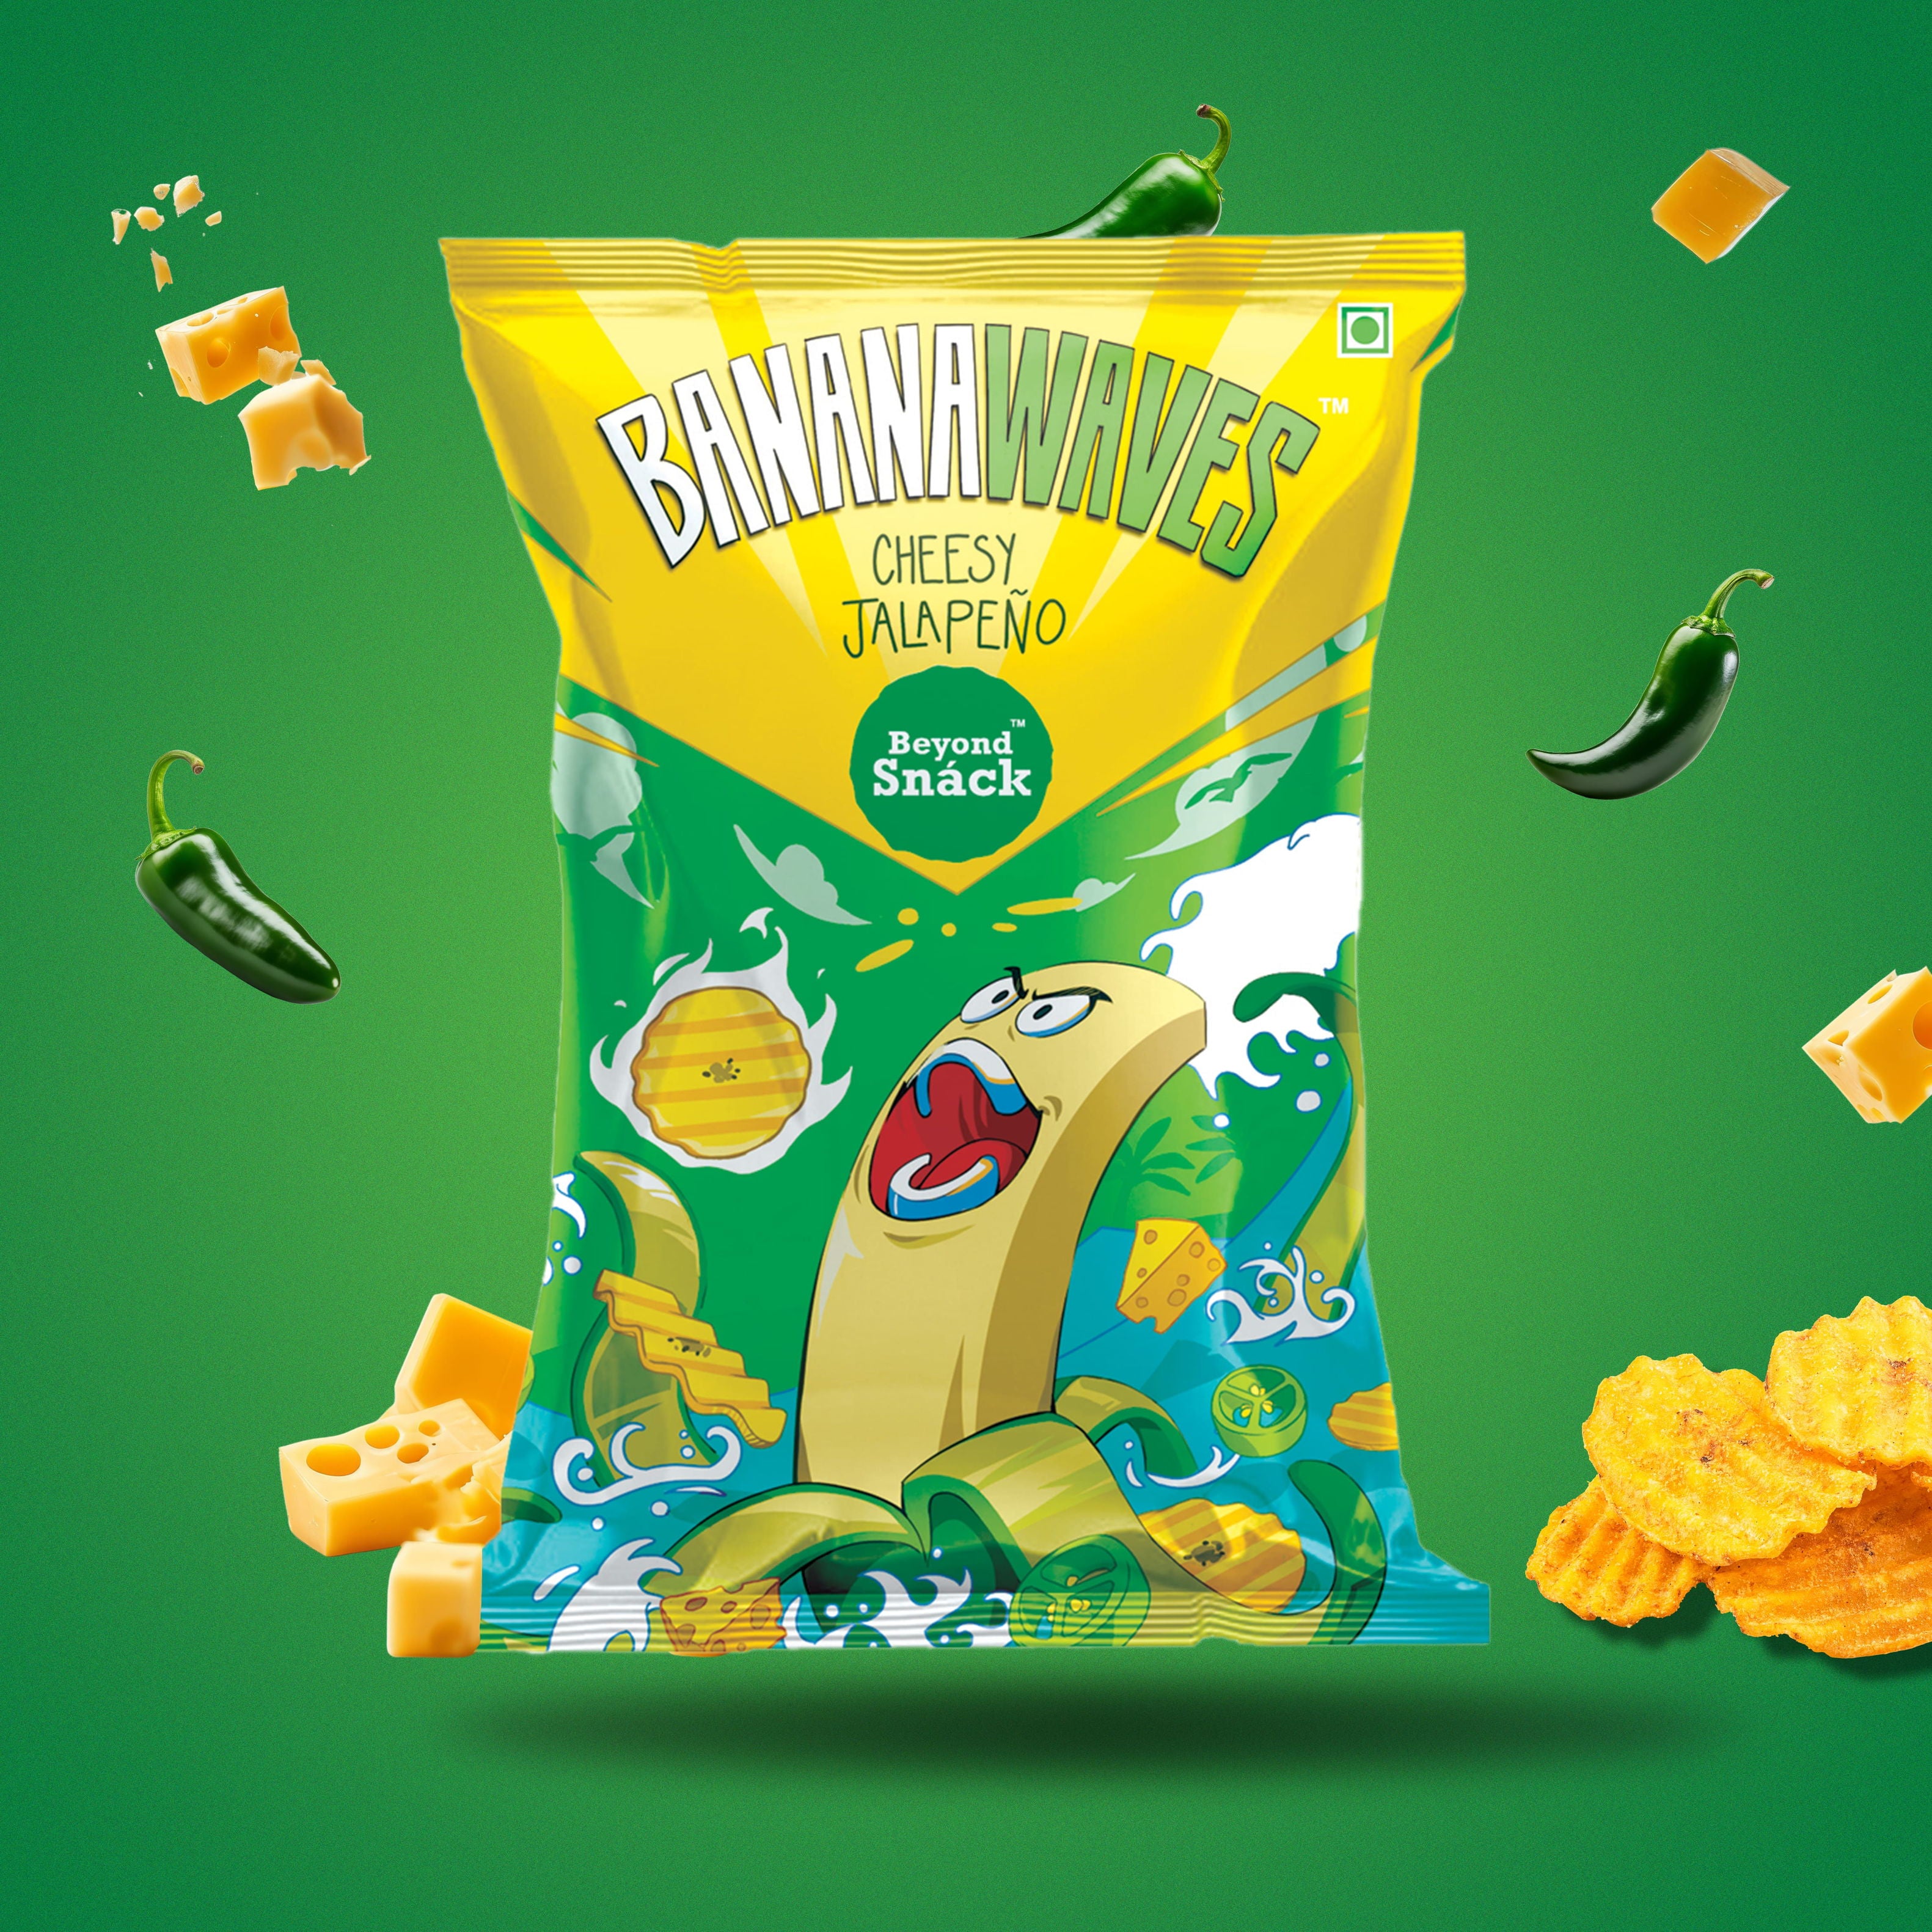 Beyond Snack banana waves chips snack with cheesy jalapeno 